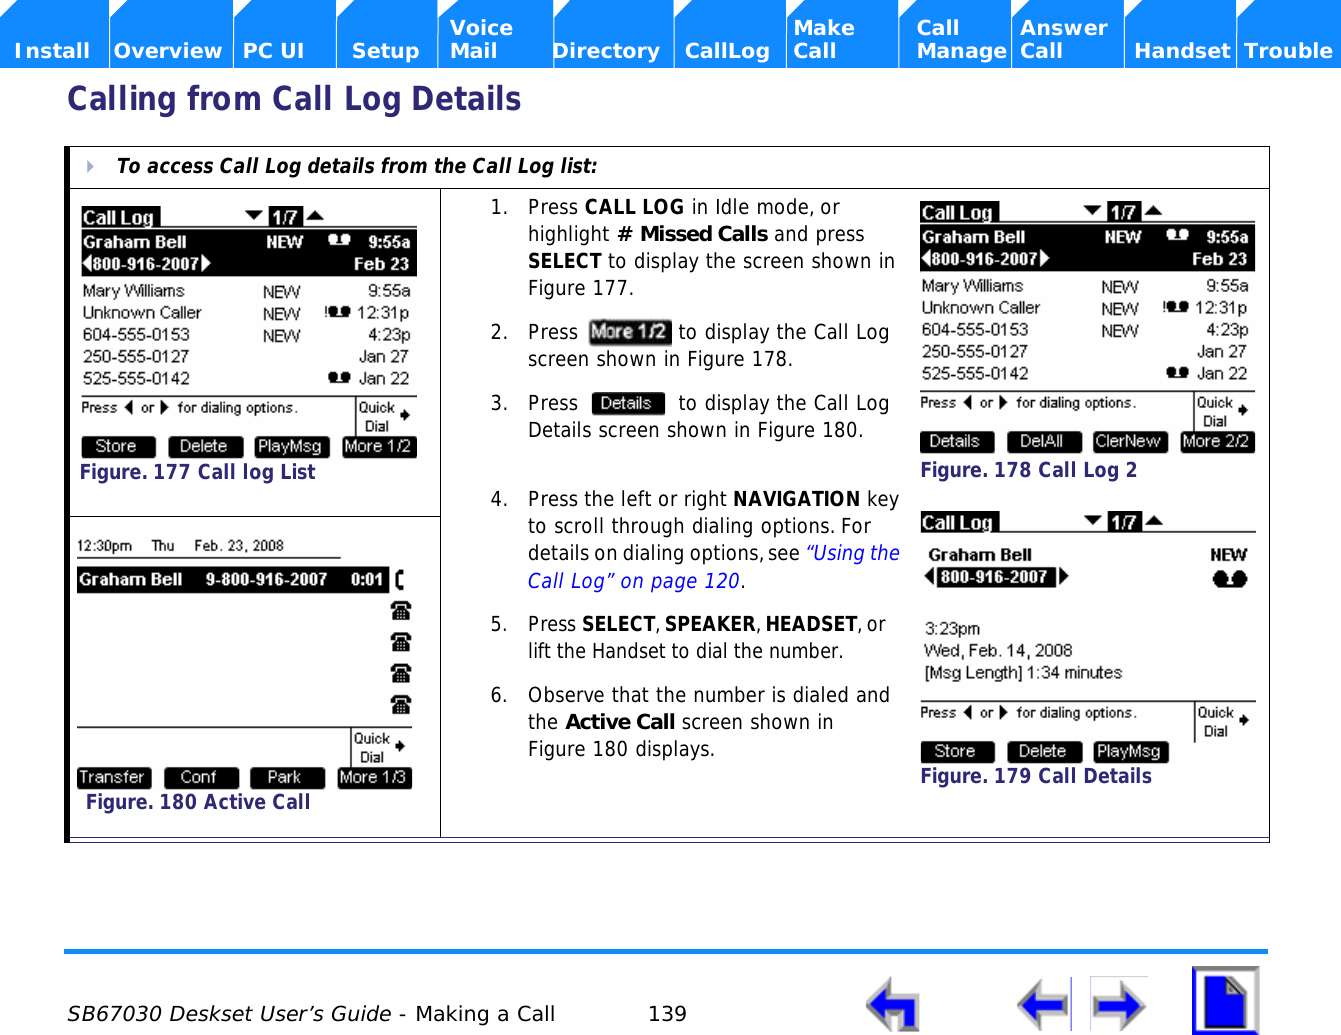  SB67030 Deskset User’s Guide - Making a Call 139    Voice Make Call Answer  Install Overview PC UI Setup Mail Directory CallLog Call Manage Call Handset TroubleCalling from Call Log DetailsTo access Call Log details from the Call Log list:1. Press CALL LOG in Idle mode, or highlight # Missed Calls and press SELECT to display the screen shown in Figure 177.2. Press   to display the Call Log screen shown in Figure 178.3. Press   to display the Call Log Details screen shown in Figure 180.4. Press the left or right NAVIGATION key to scroll through dialing options. For details on dialing options, see “Using the Call Log” on page 120.5. Press SELECT, SPEAKER, HEADSET, or lift the Handset to dial the number.6. Observe that the number is dialed and the Active Call screen shown in Figure 180 displays.Figure. 177 Call log ListFigure. 178 Call Log 2Figure. 179 Call DetailsFigure. 180 Active Call